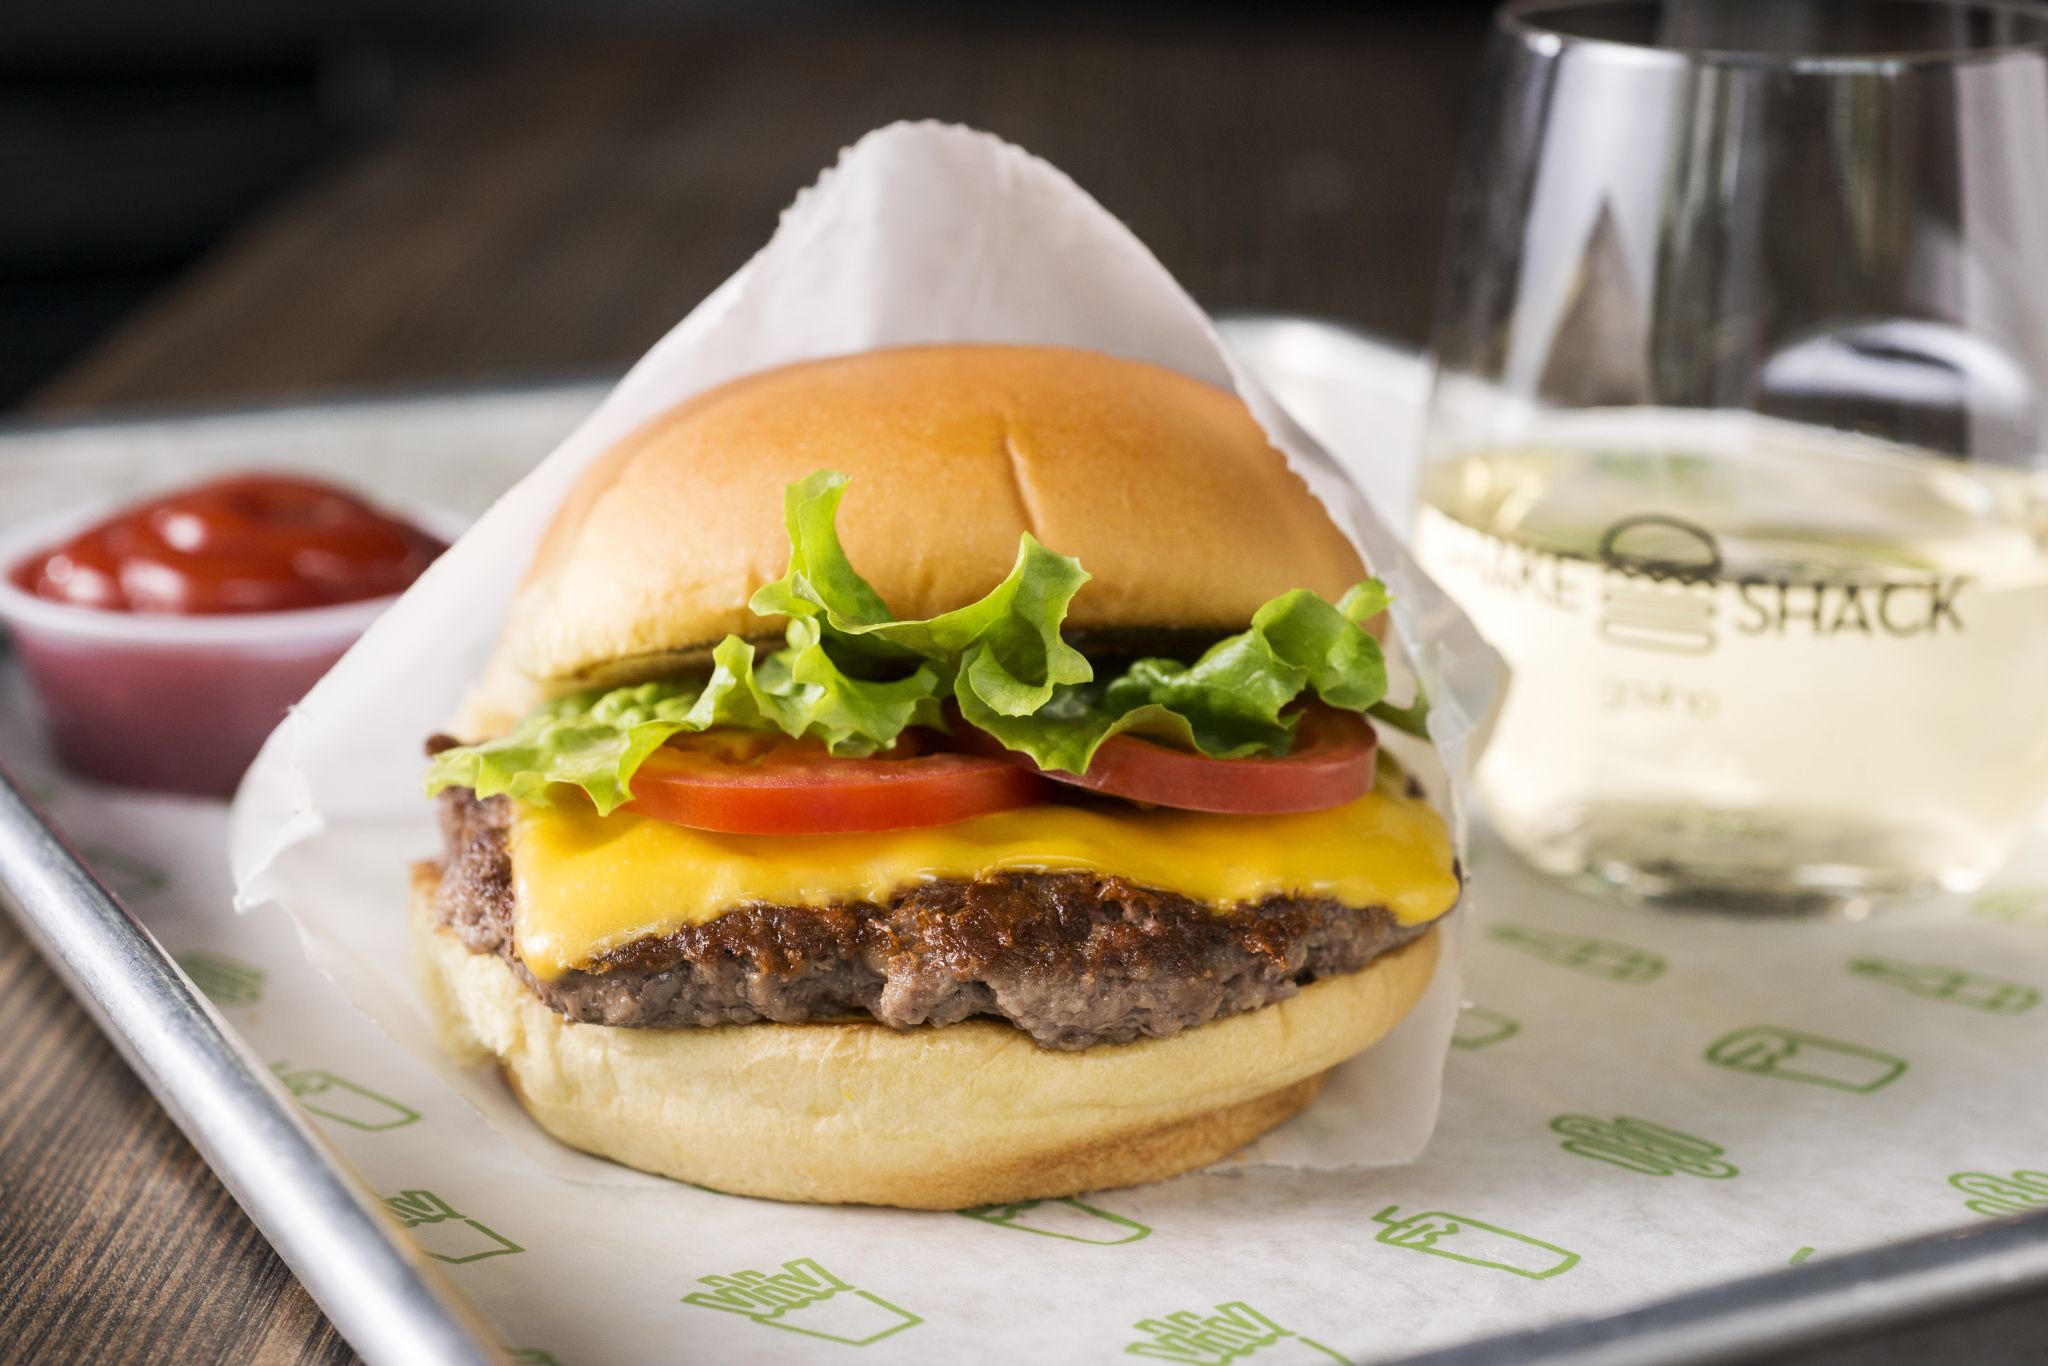 Bay Area's first Shake Shack coming to Stanford Shopping Center